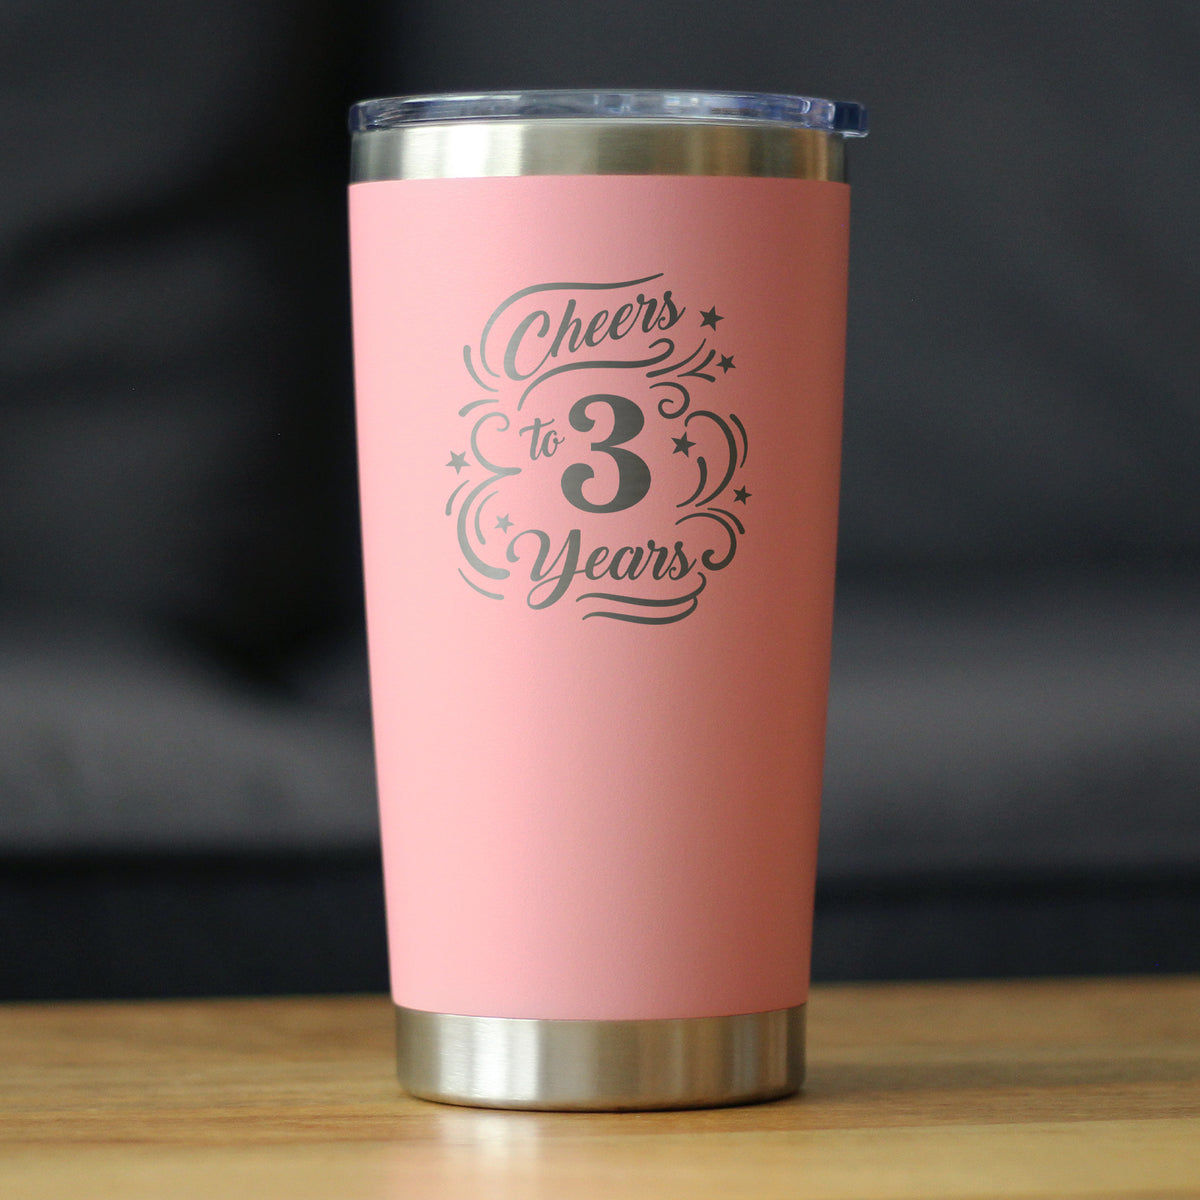 Cheers to 3 Years - Insulated Coffee Tumbler Cup with Sliding Lid - Stainless Steel Insulated Mug - 3rd Anniversary Gifts and Party Decor